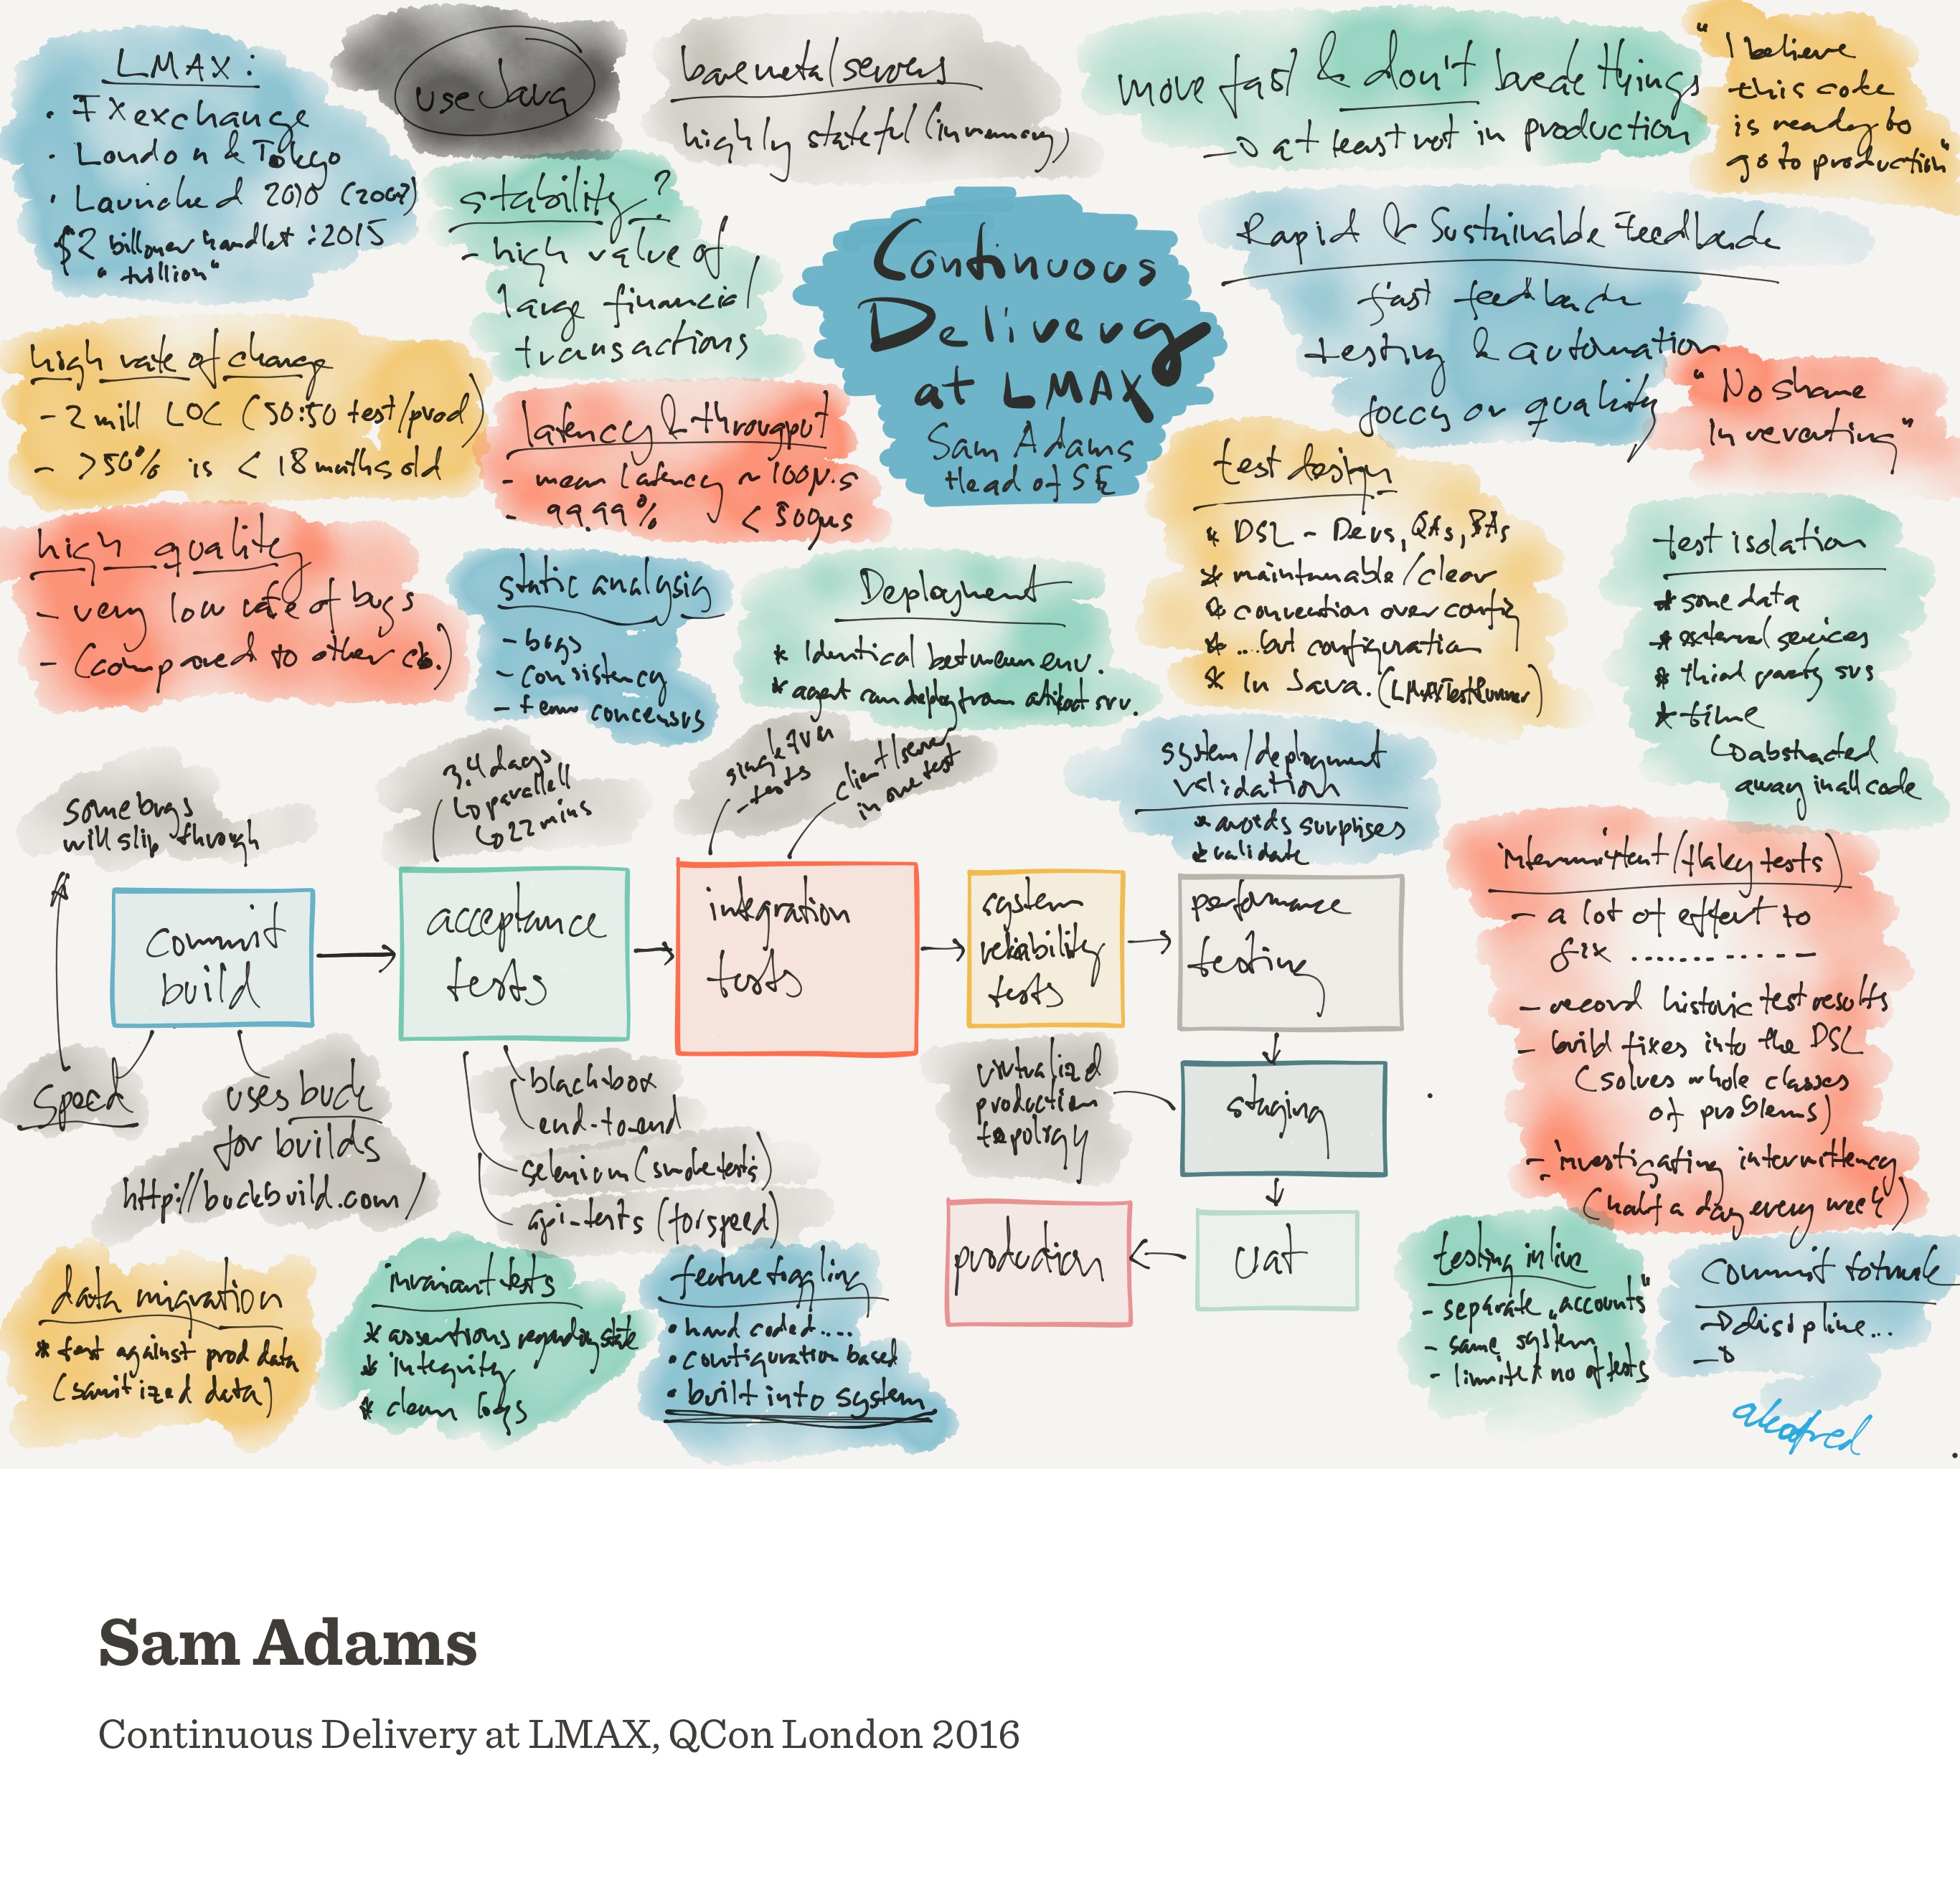 Notes from Continuous Delivery at LMAX (Sam Adams)